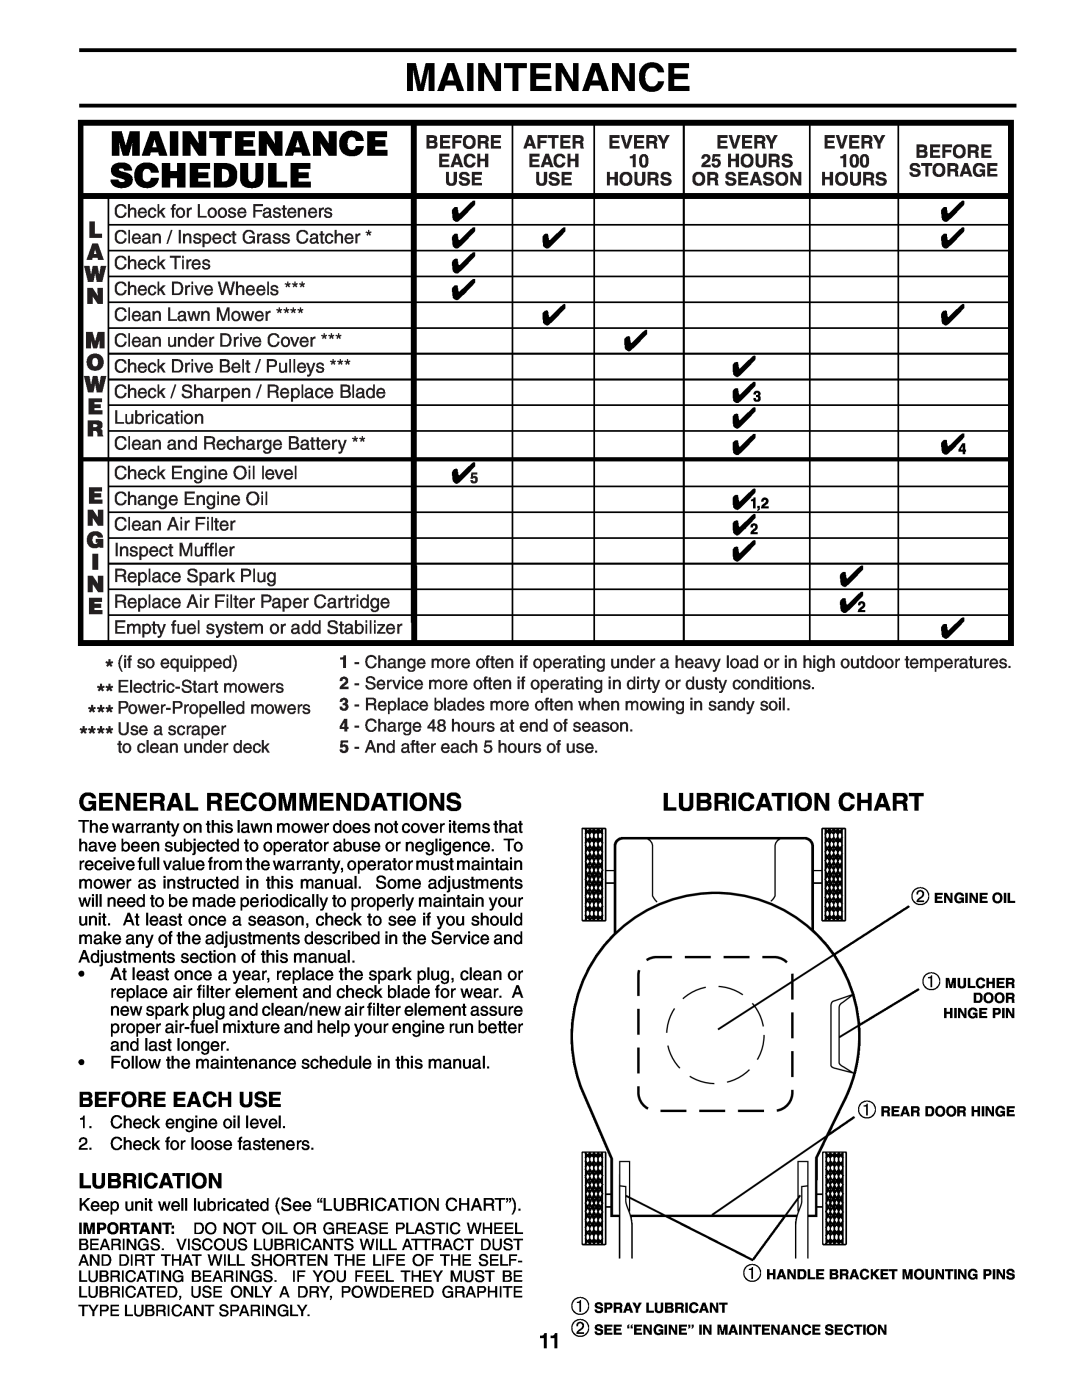 Husqvarna 7021RES Maintenance, General Recommendations, Lubrication Chart, Before Each Use, After, Every, Storage, Hours 